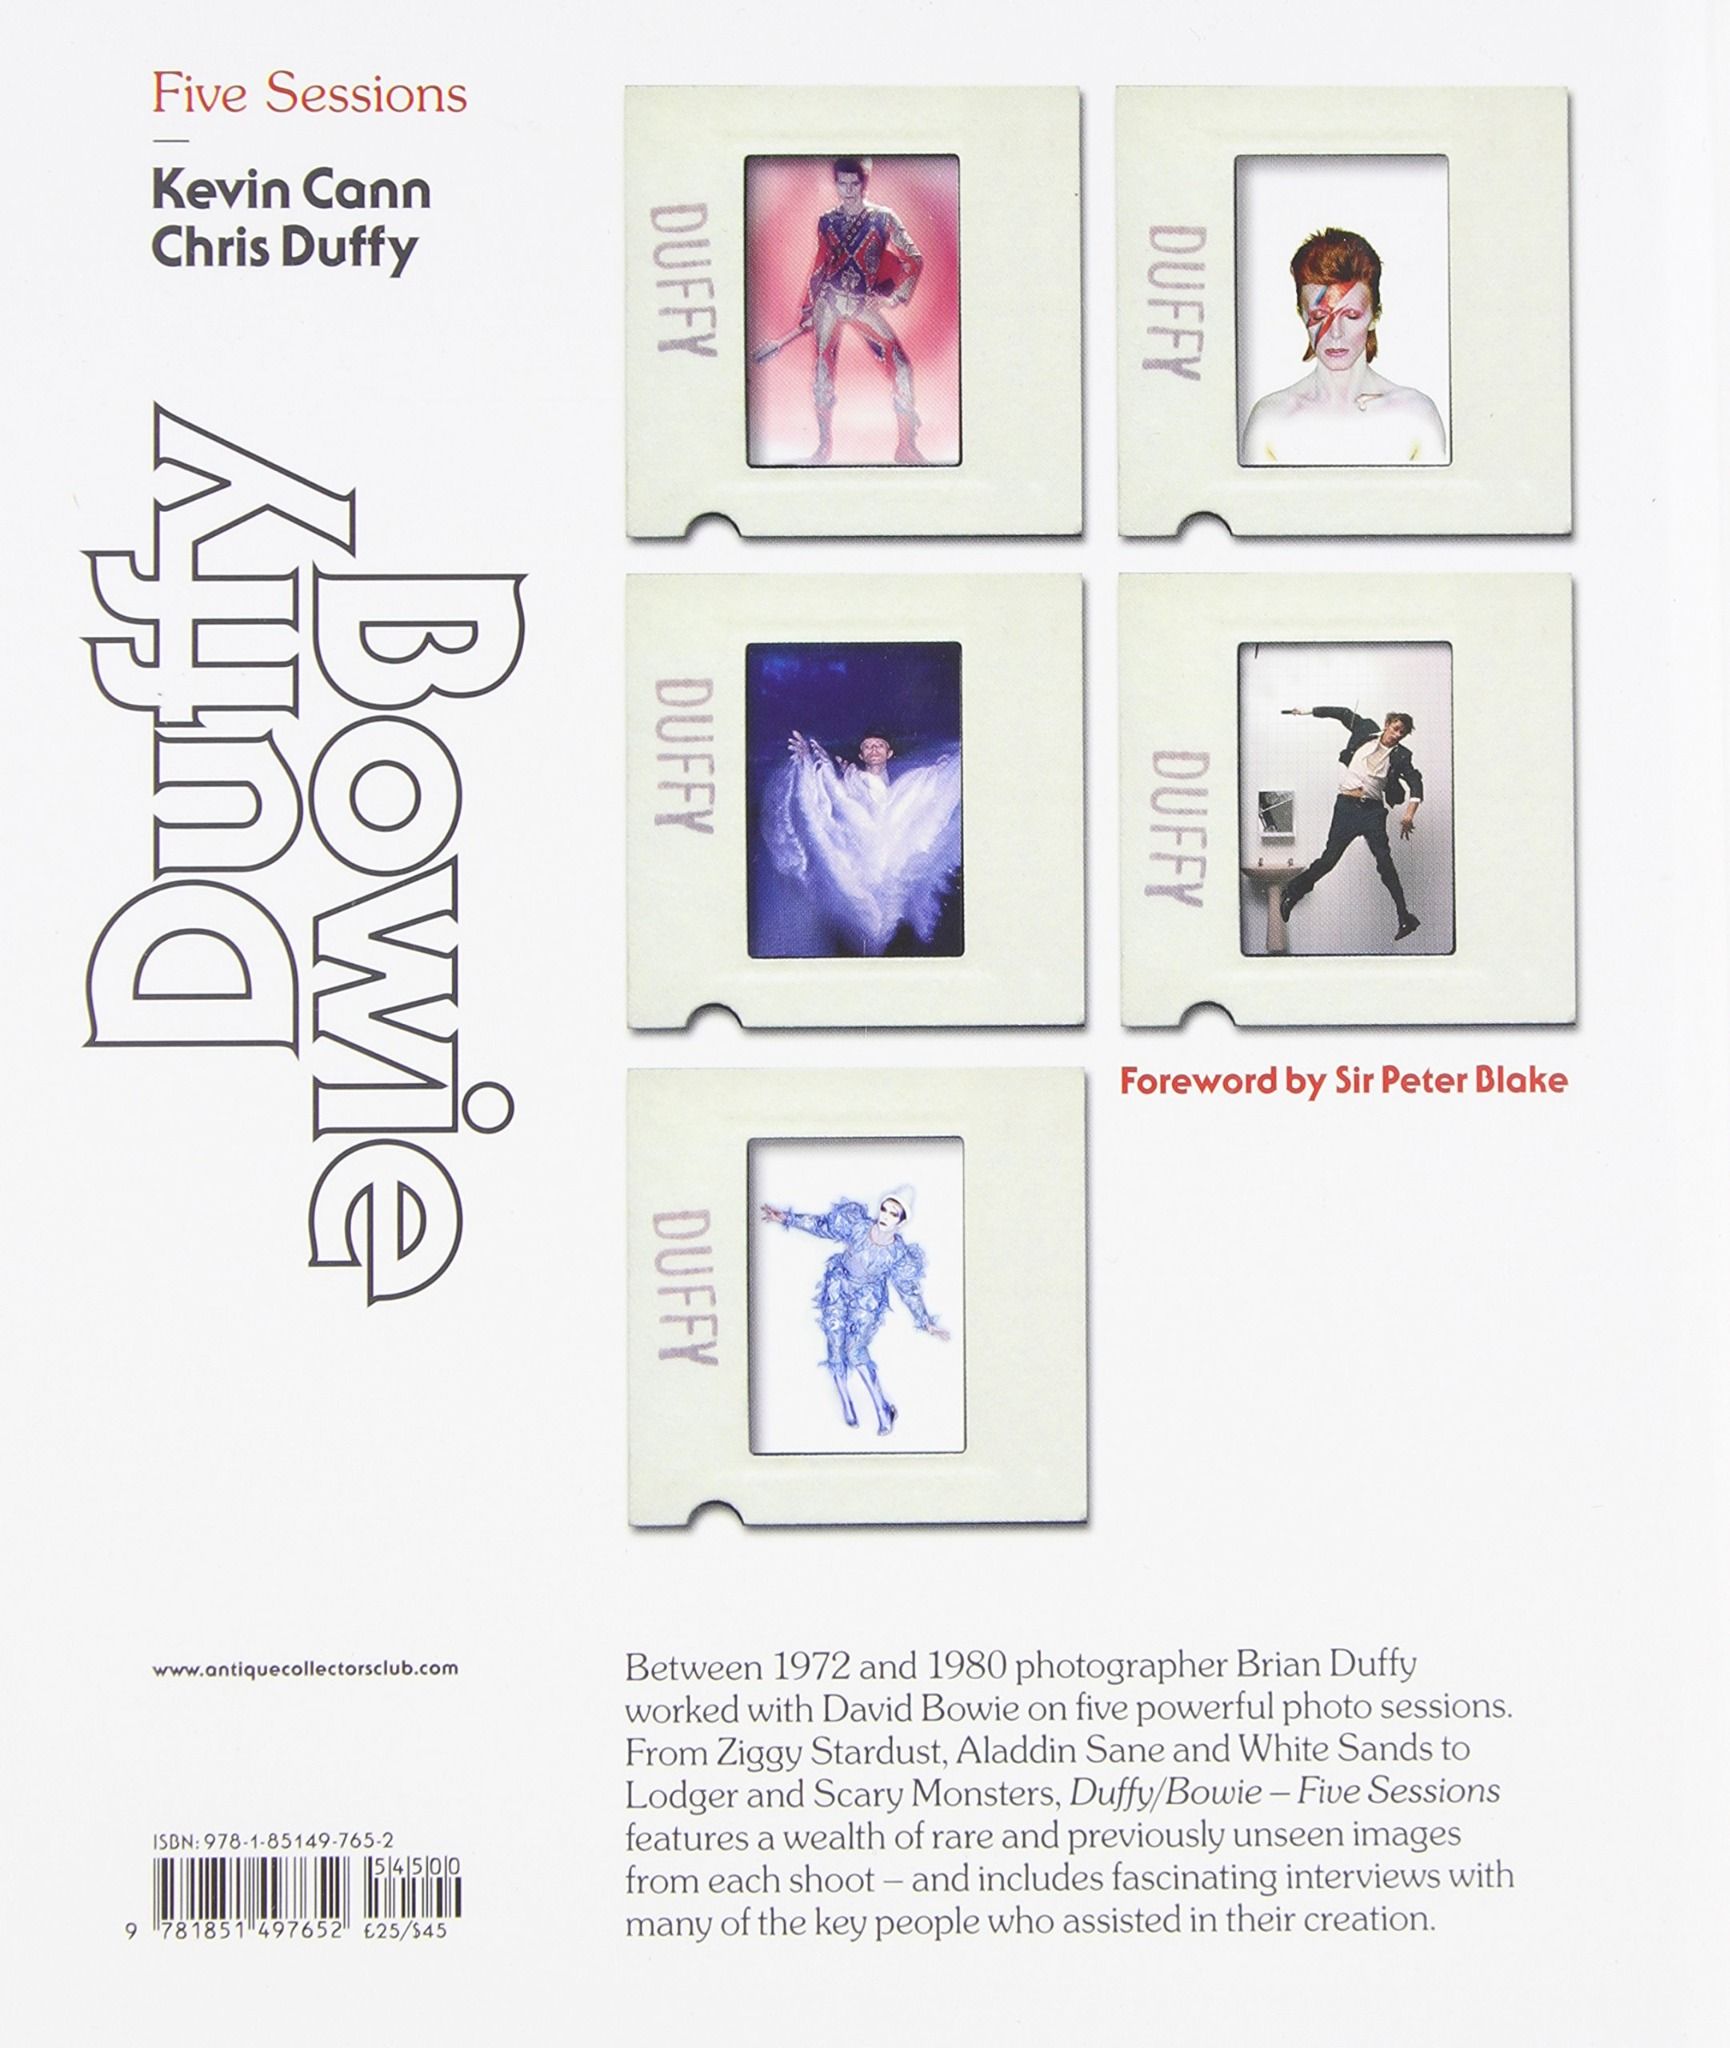  Duffy Bowie: Five Sessions_Kevin Cann and Chris Duffy_9781851497652_ACC Art Books 